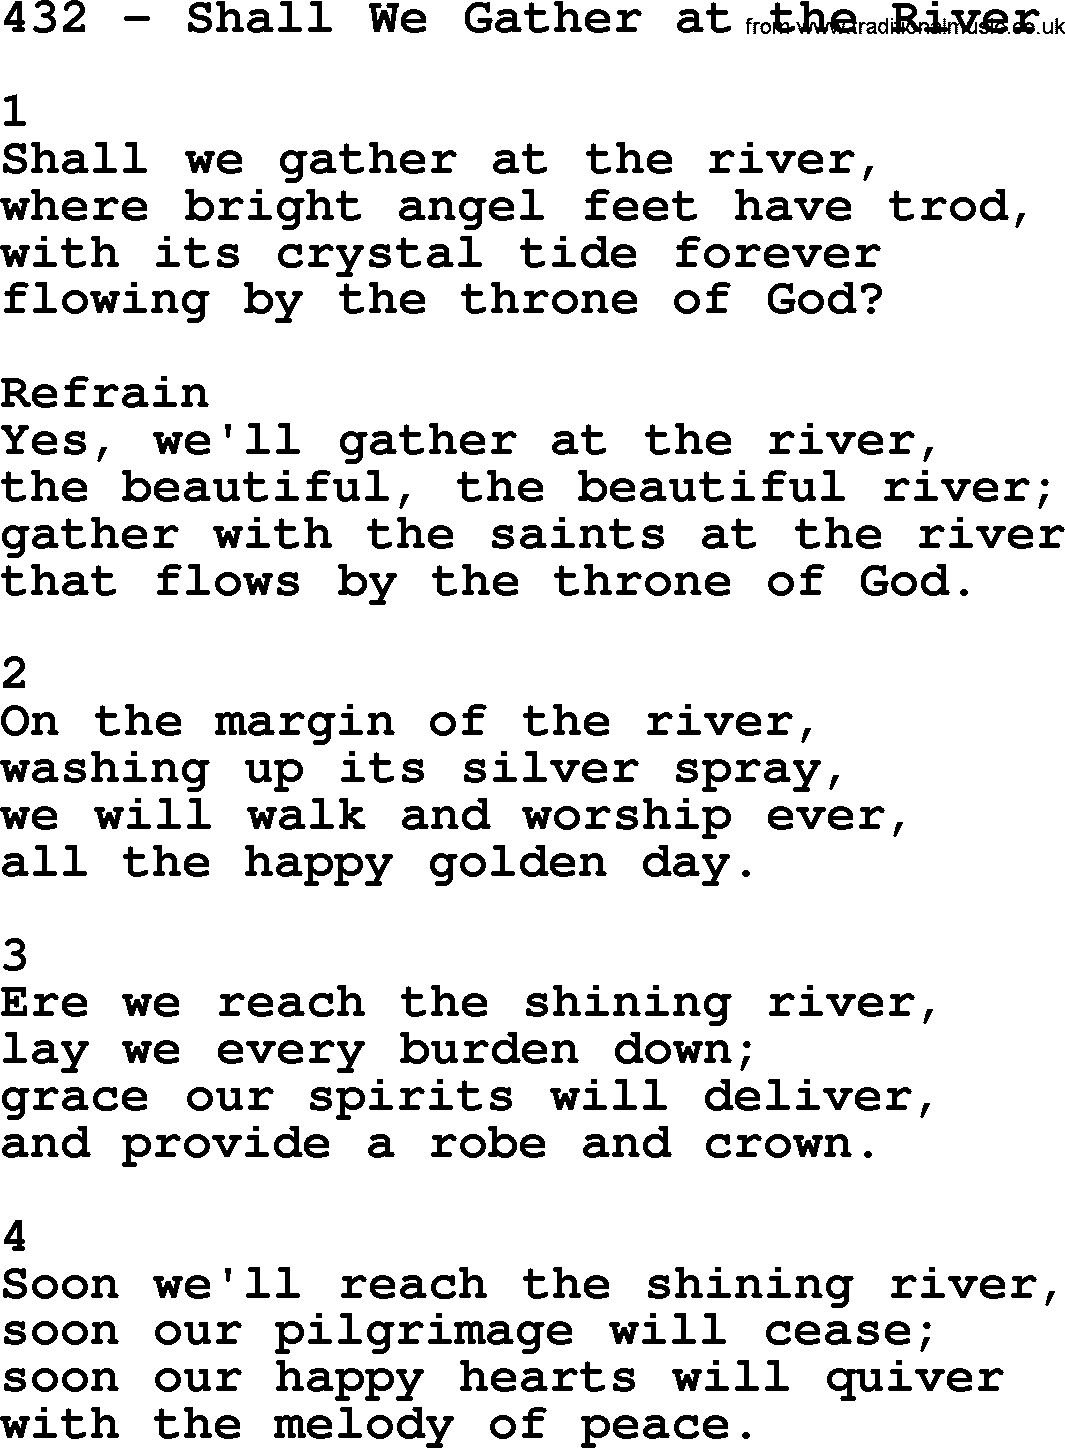 Complete Adventis Hymnal, title: 432-Shall We Gather At The River, with lyrics, midi, mp3, powerpoints(PPT) and PDF,